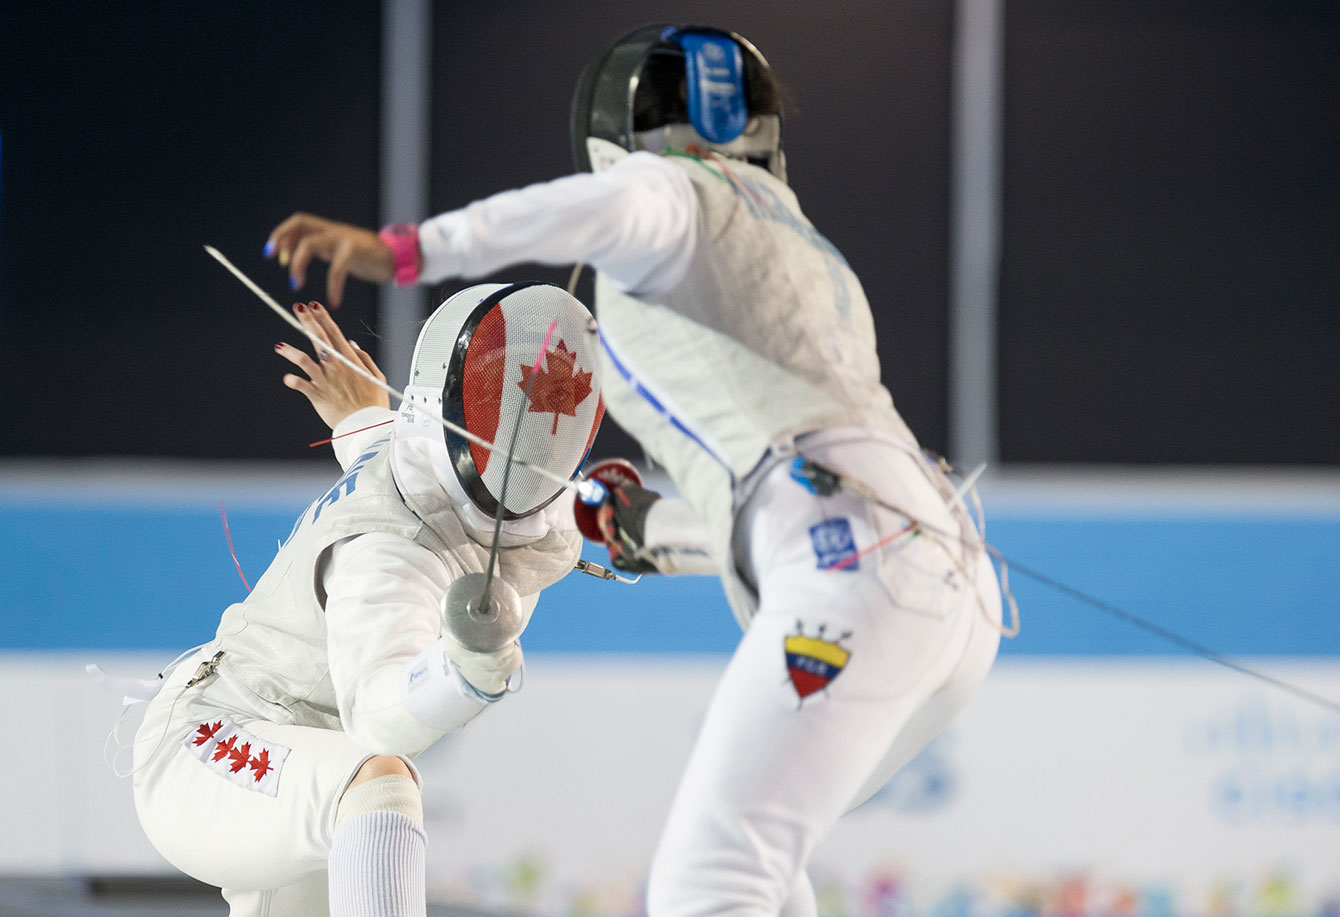 Alanna Goldie won TO2015 bronze in the women's individual foil on July 22.